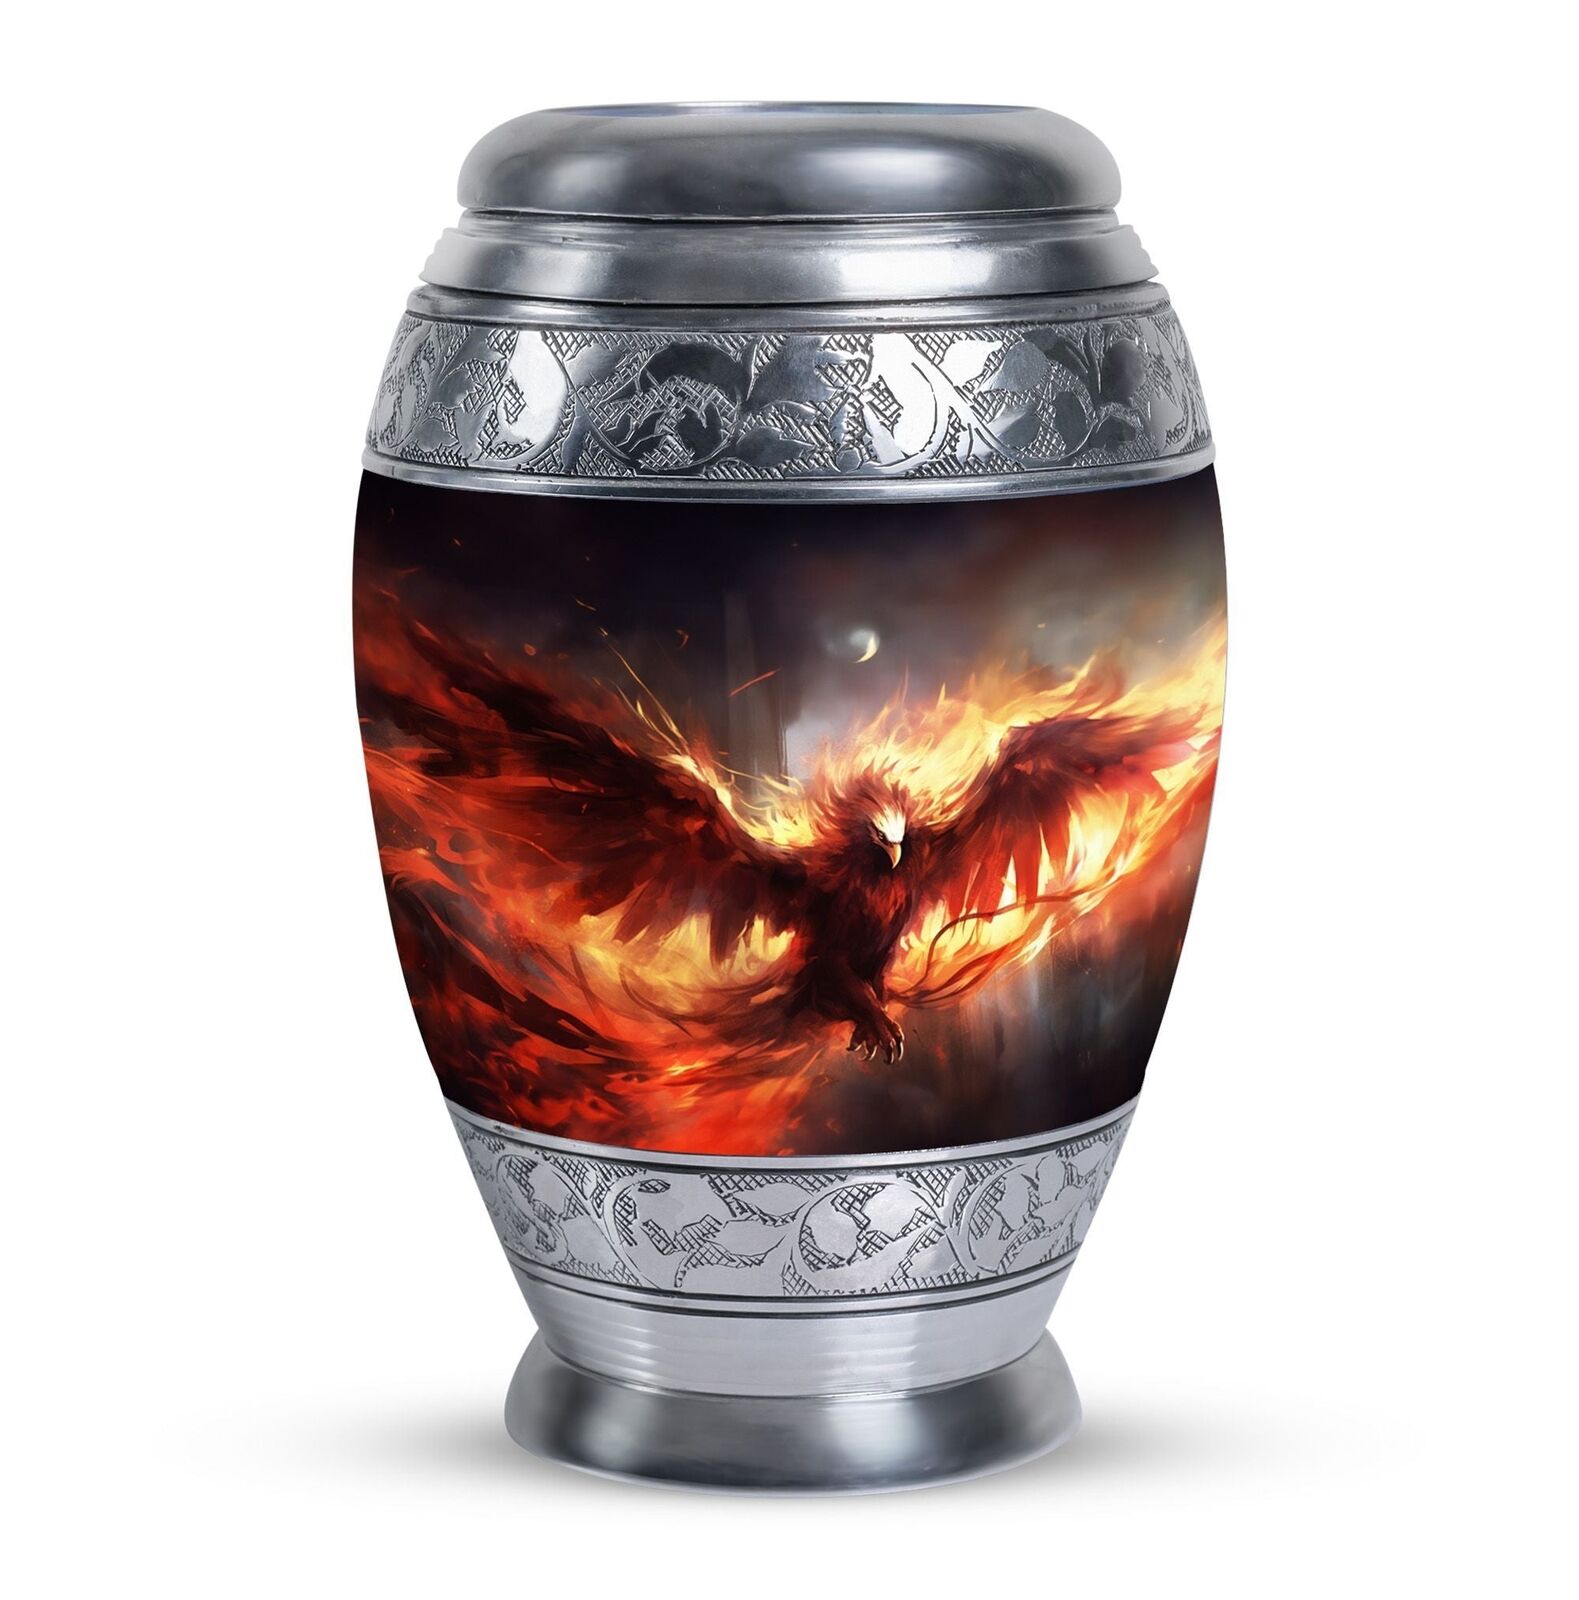 Exquisite Red Phoenix Cremation Urn for Cherished Remembrance